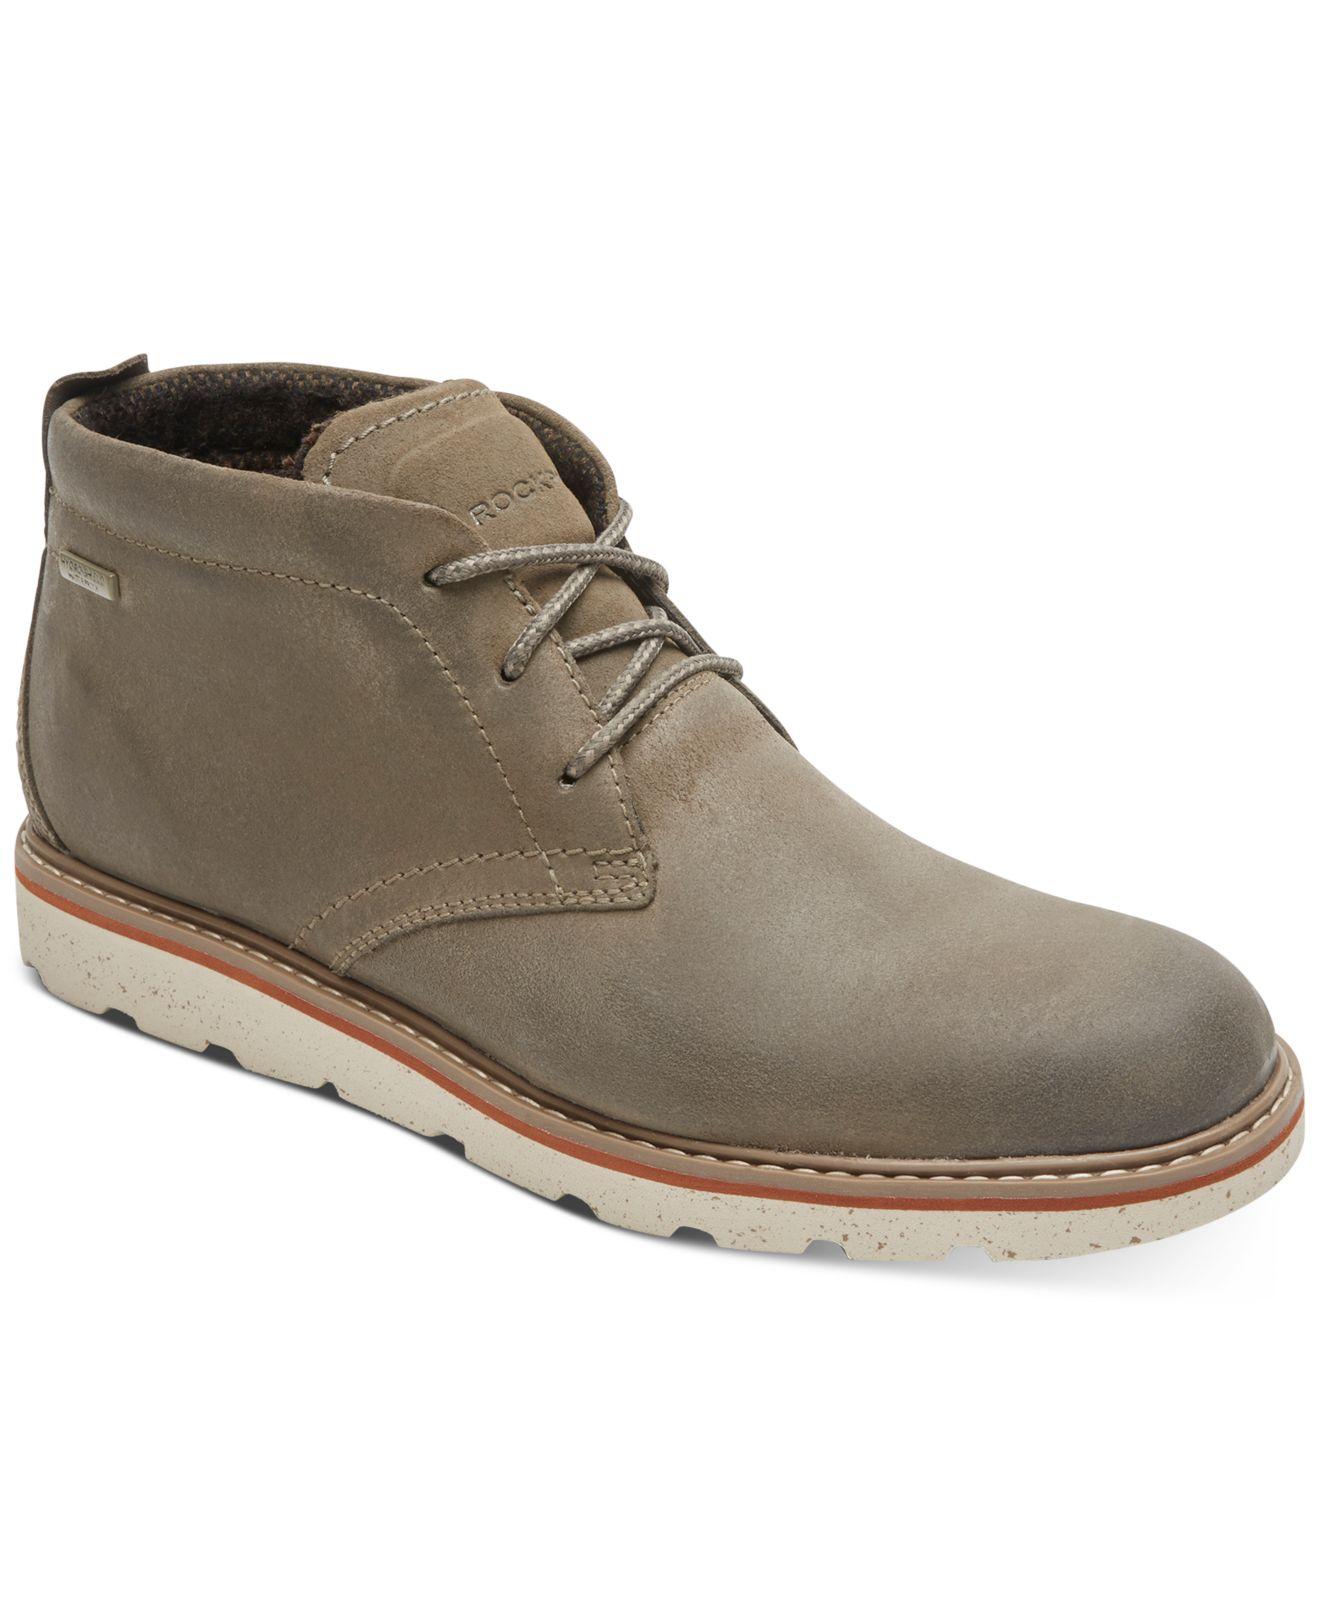 Rockport Leather Storm Front Waterproof Chukka Boots in Olive (Green ...